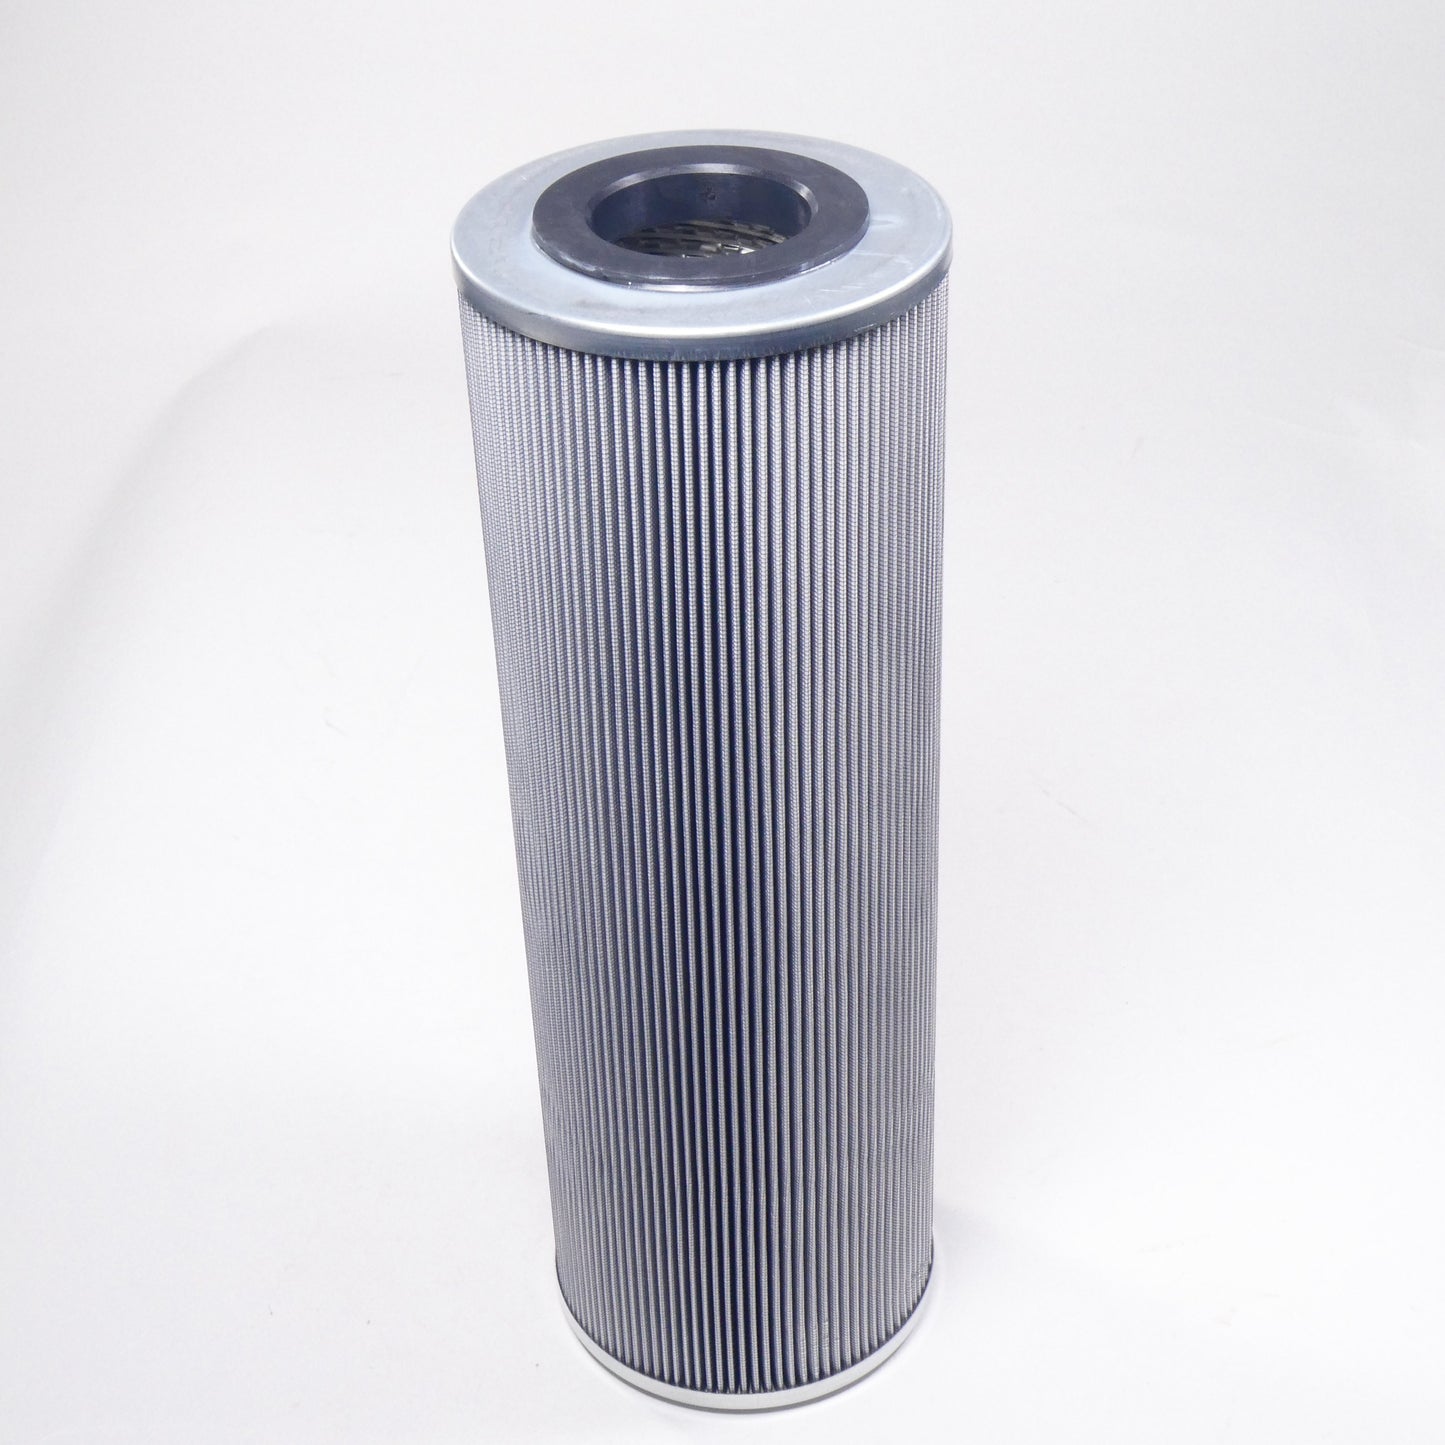 Hydrafil Replacement Filter Element for Hycoa S186-0200-V-1